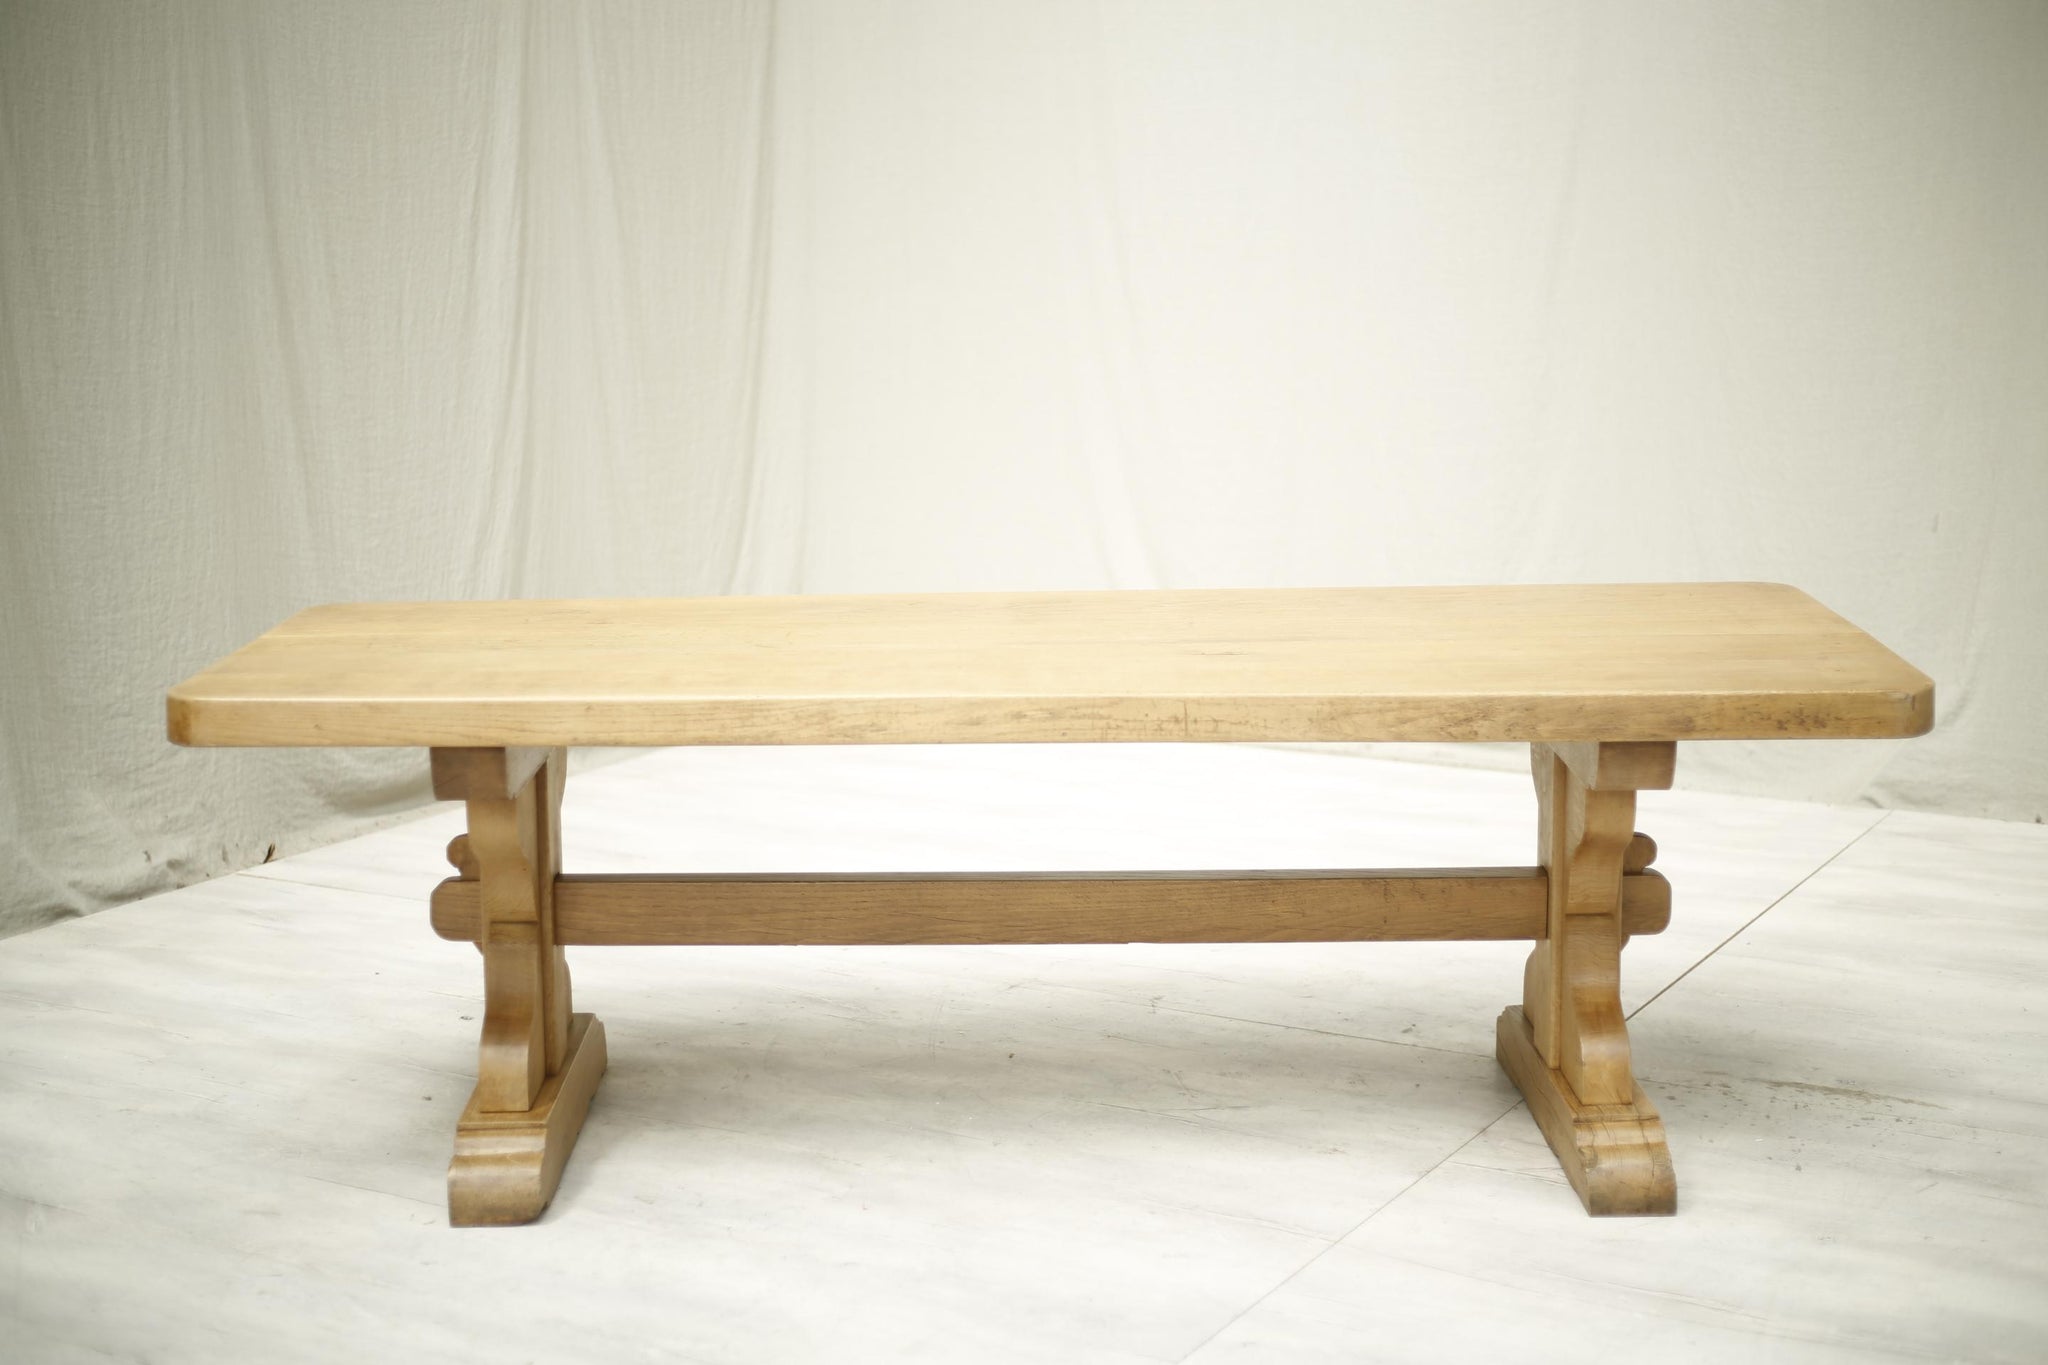 Antique 19th century Oak refectory dining table